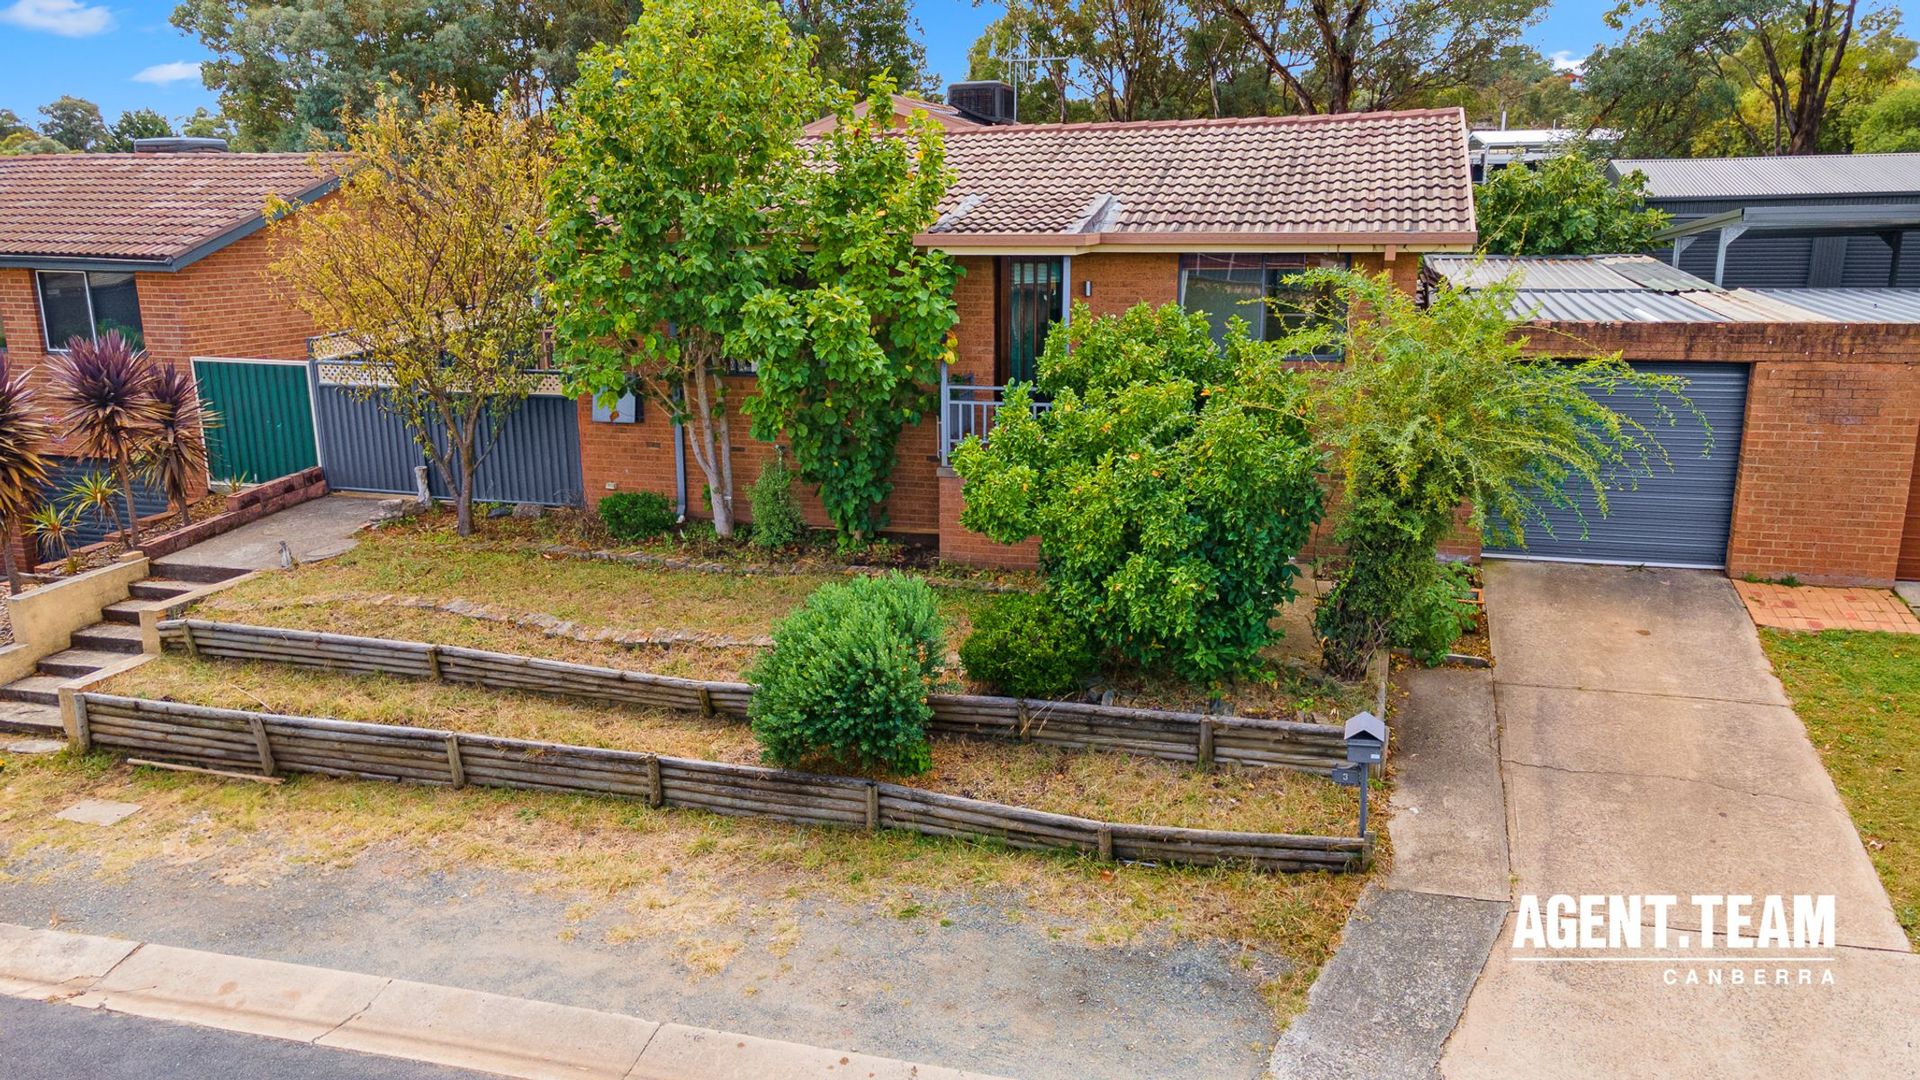 3 Schaffer Place, Charnwood ACT 2615